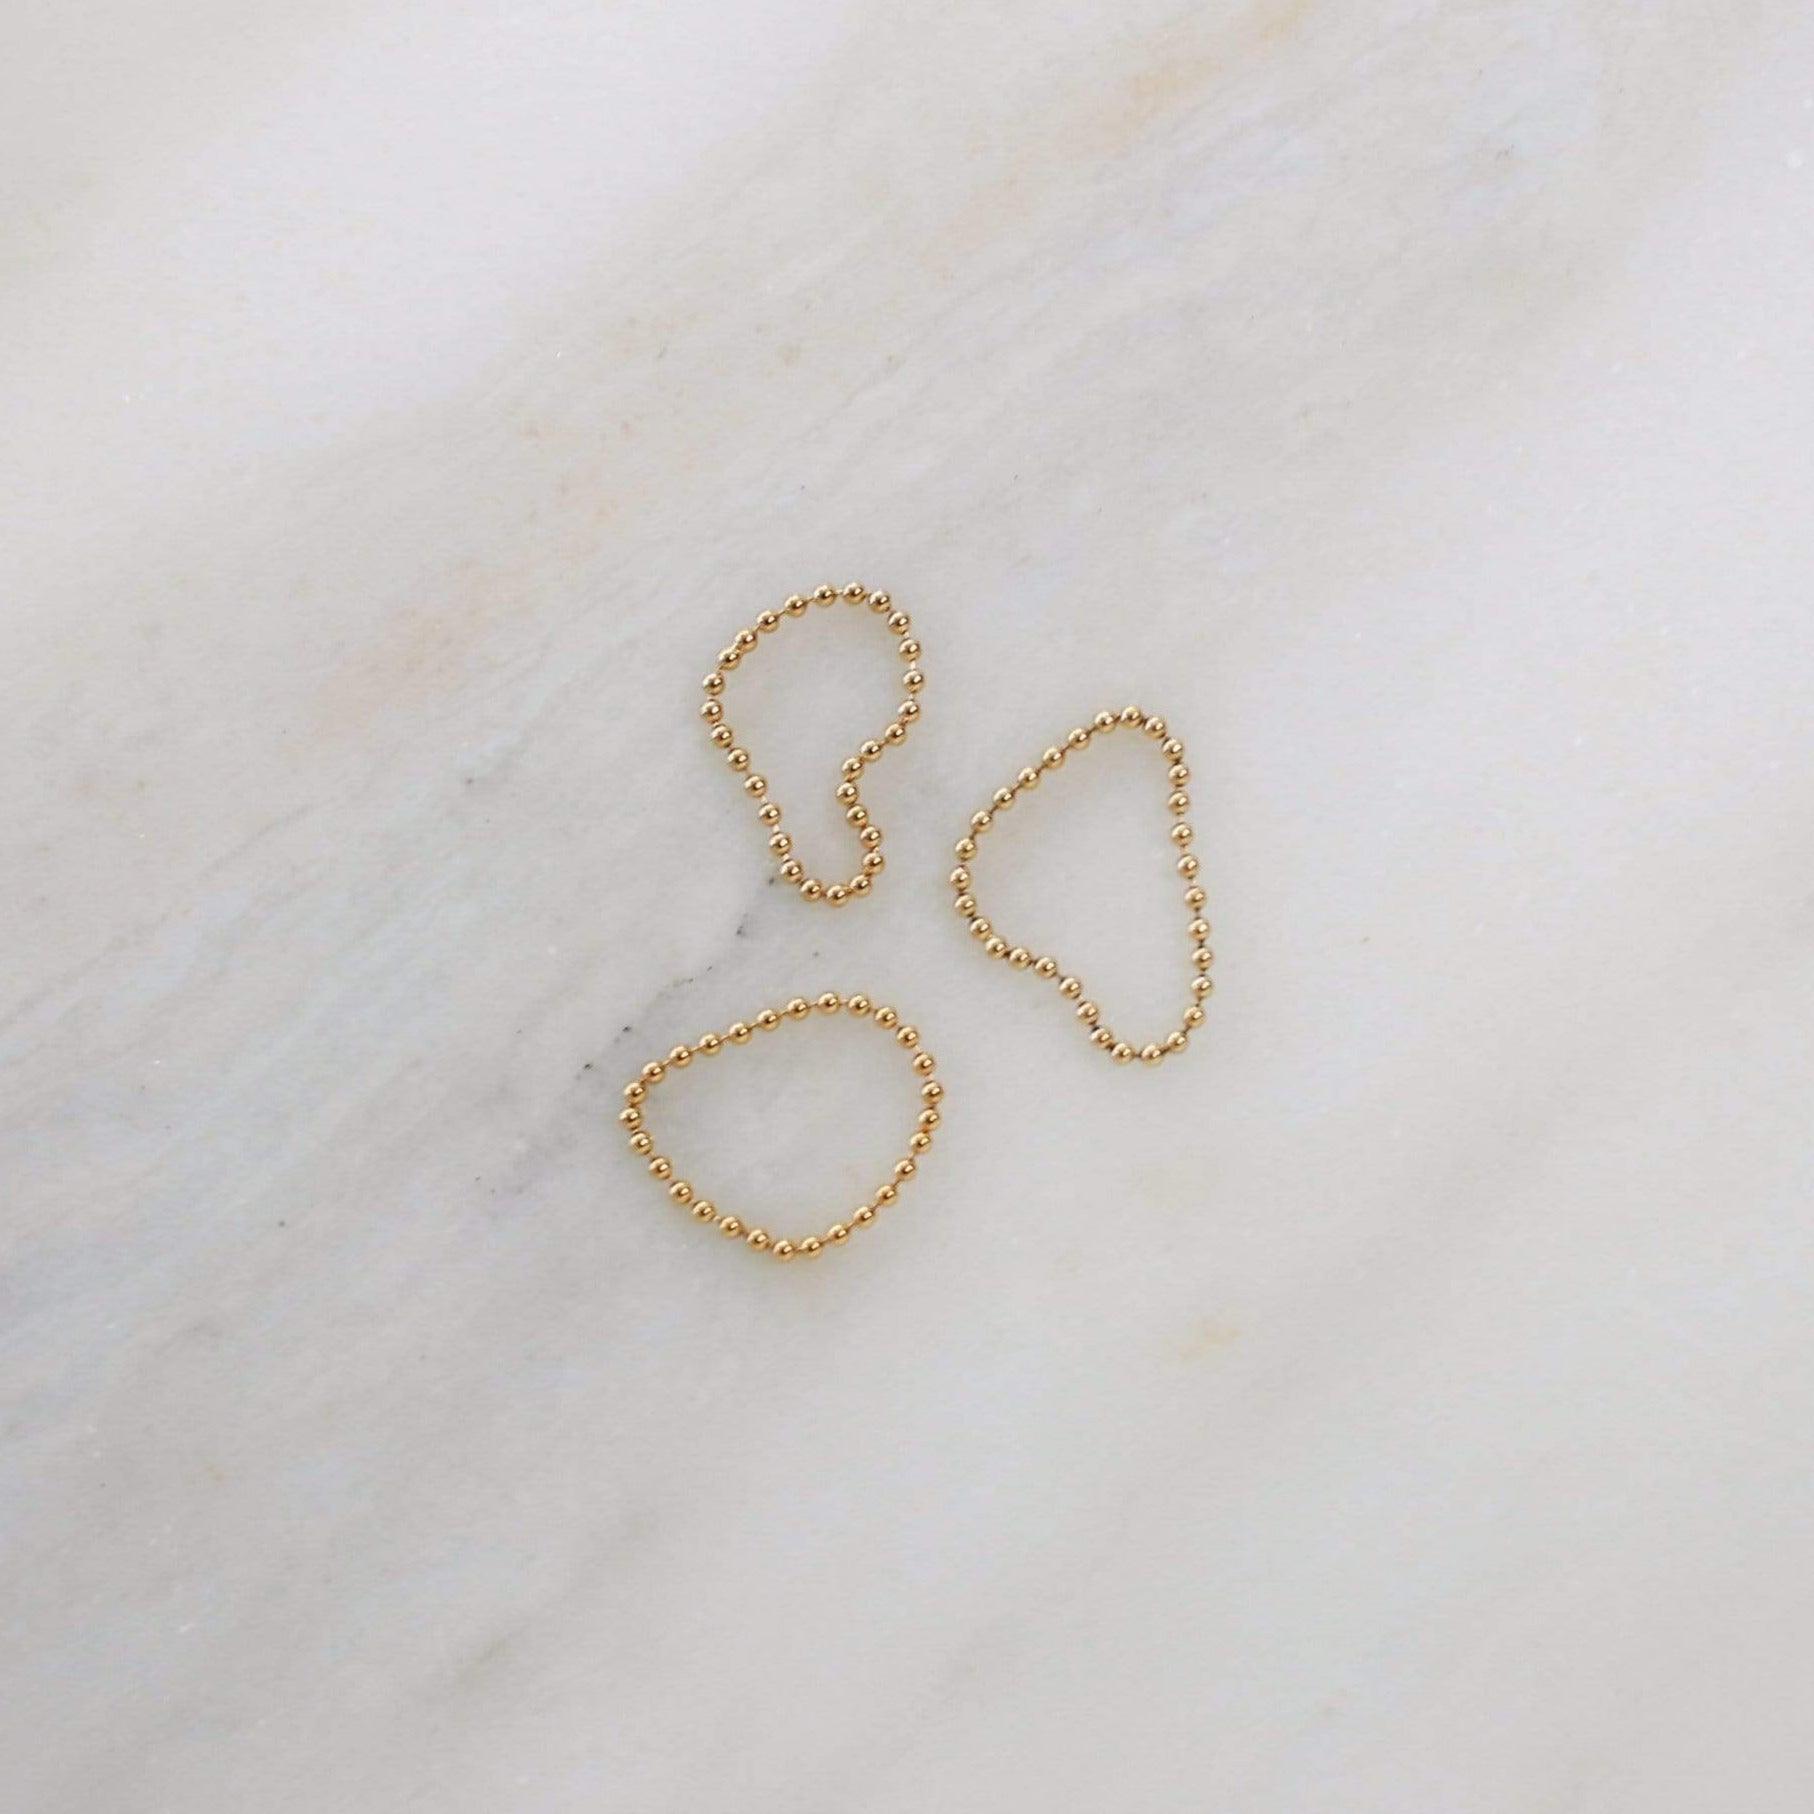 Nova Chain Rings - Nolia Jewelry - Meaningful + Sustainably Handcrafted Jewelry